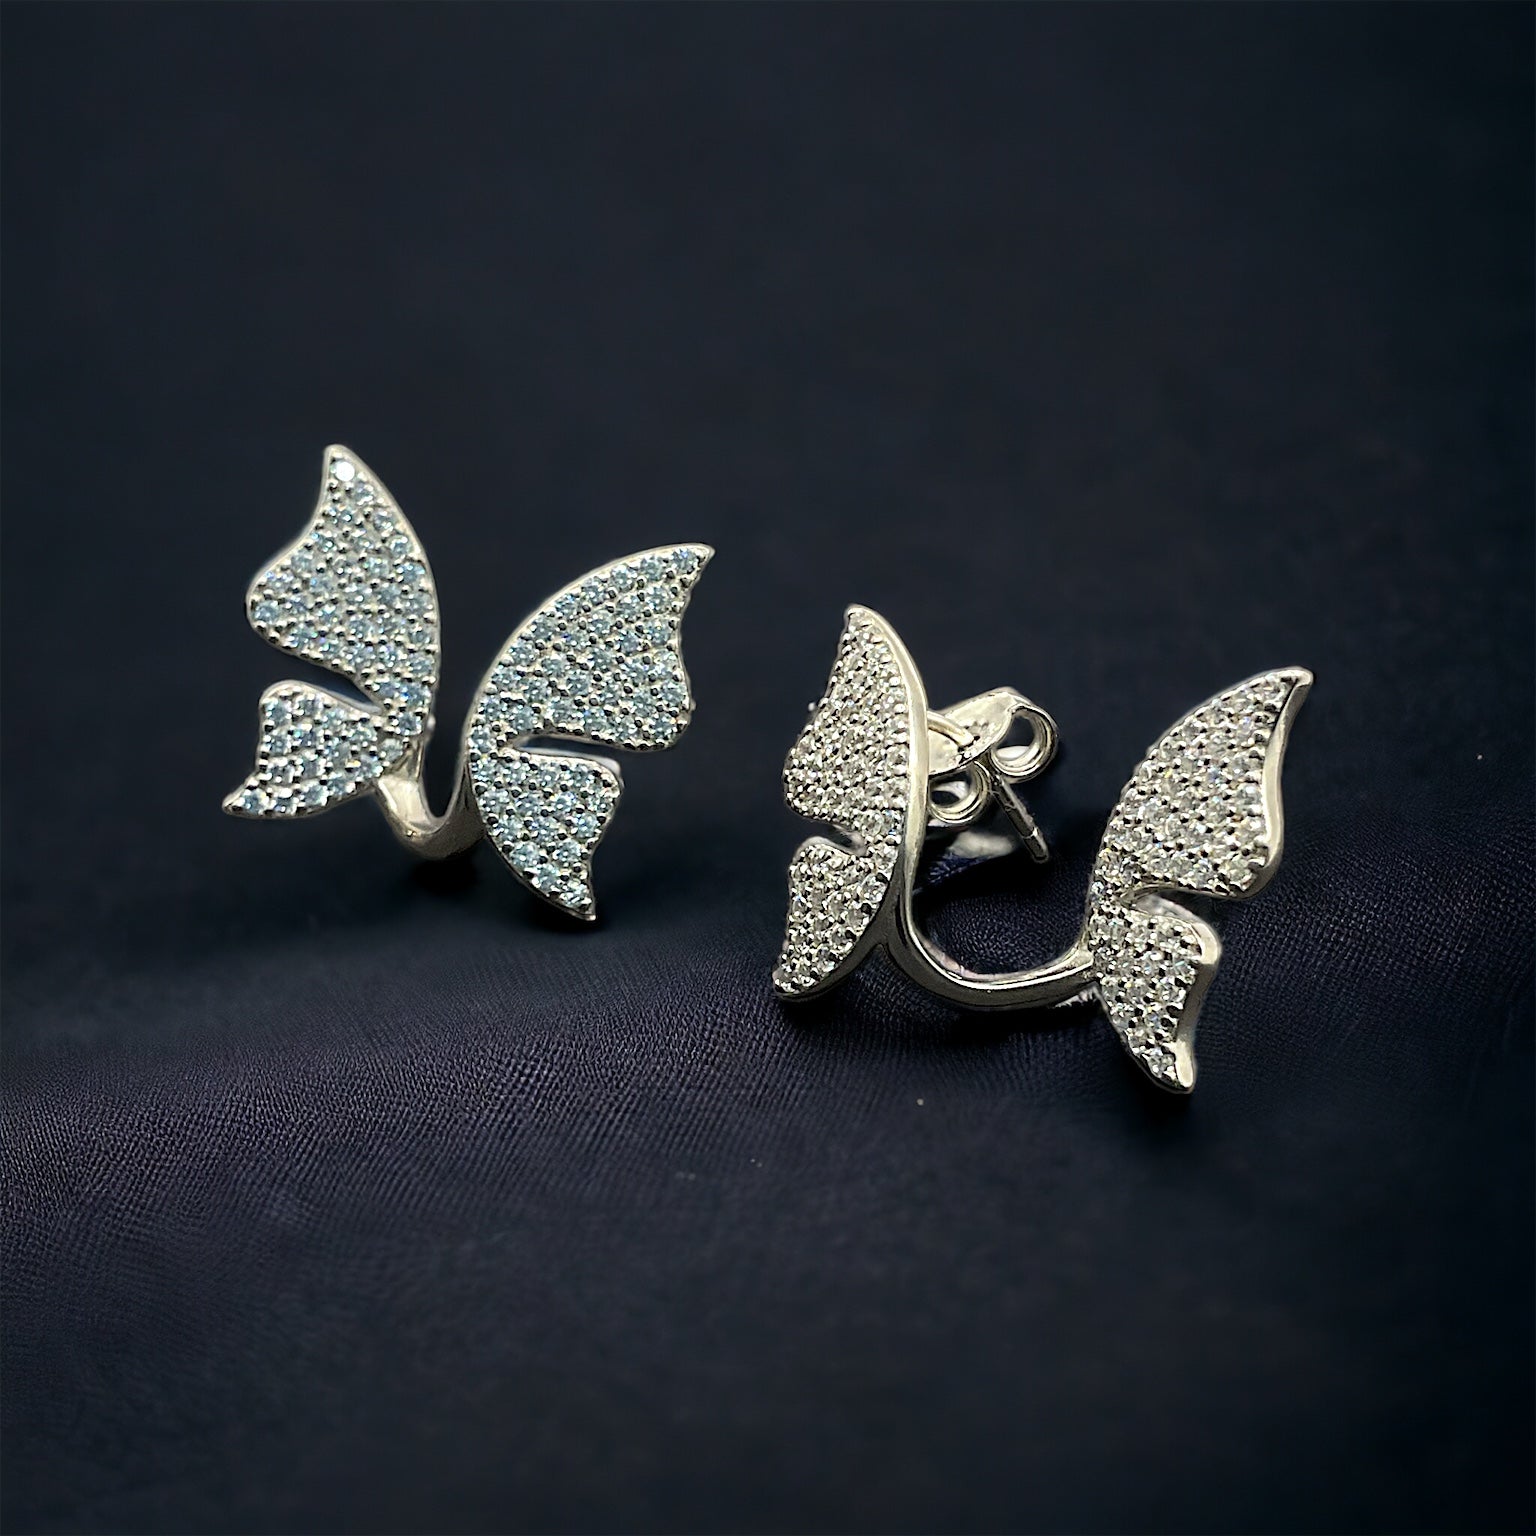 a pair of butterfly shaped earrings on a black background